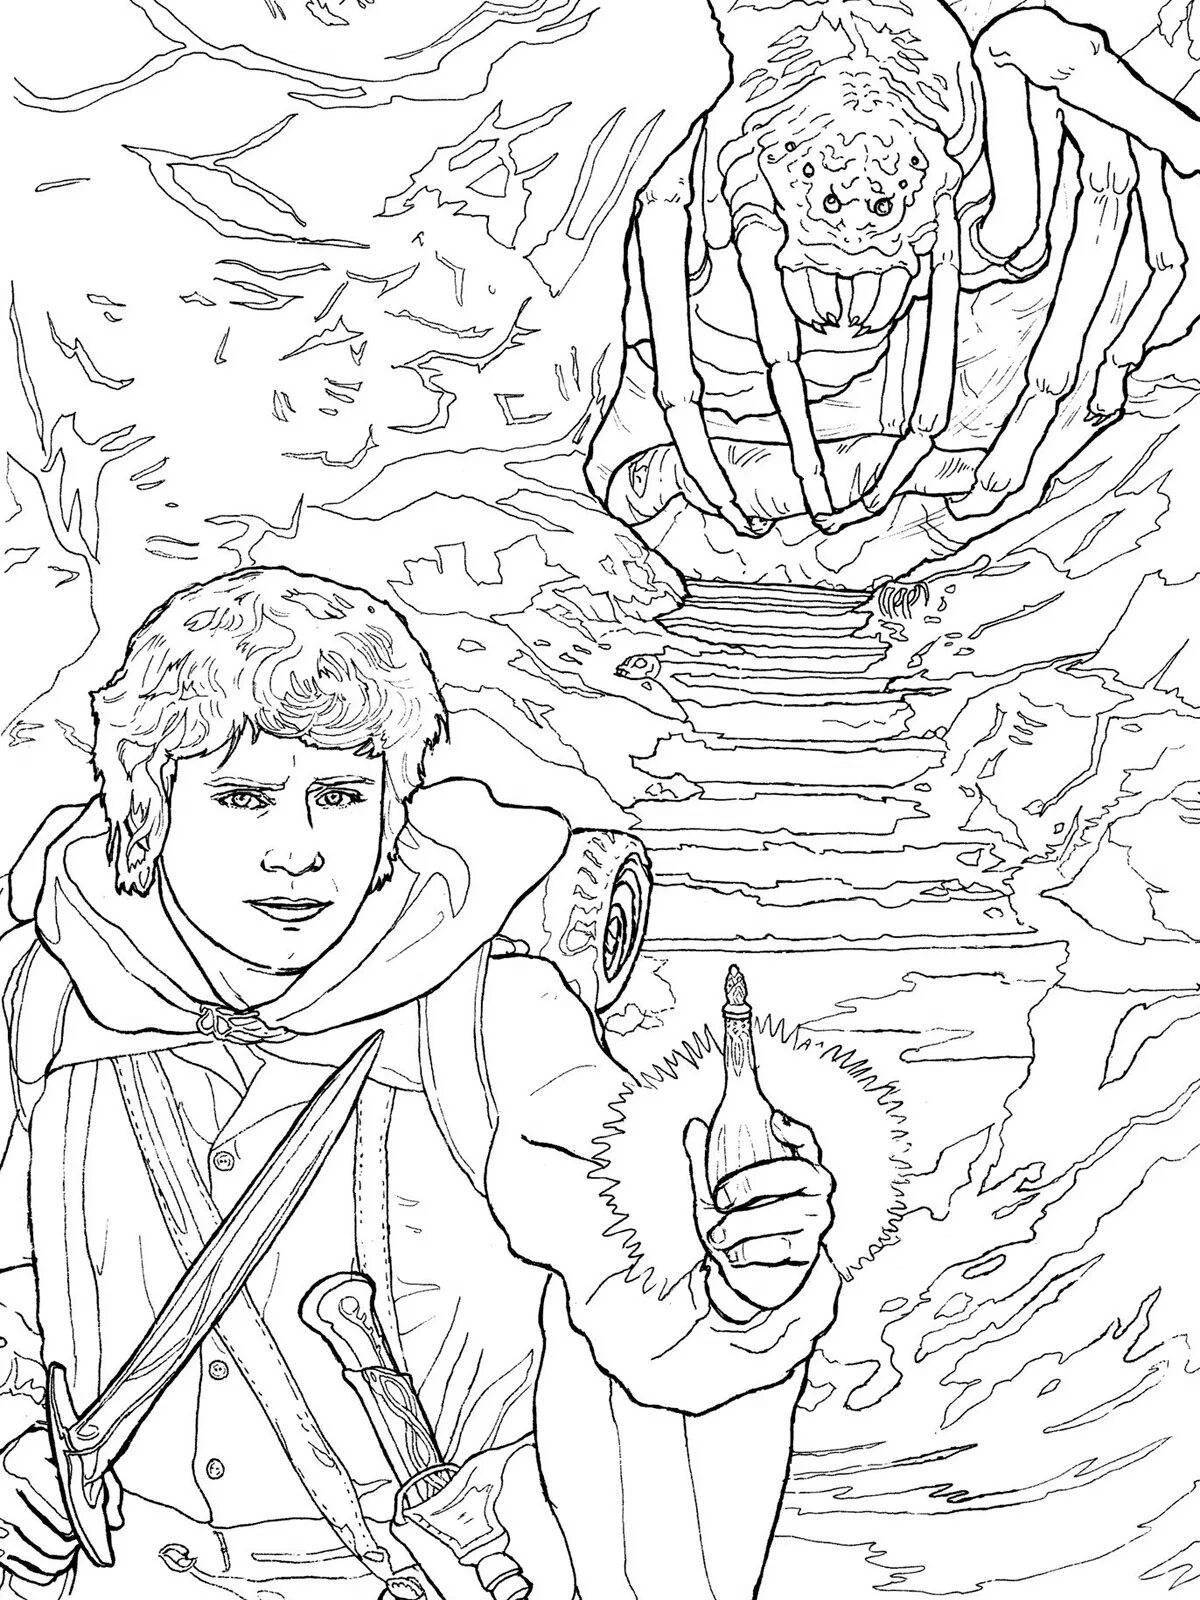 Coloring page shiny wanderer